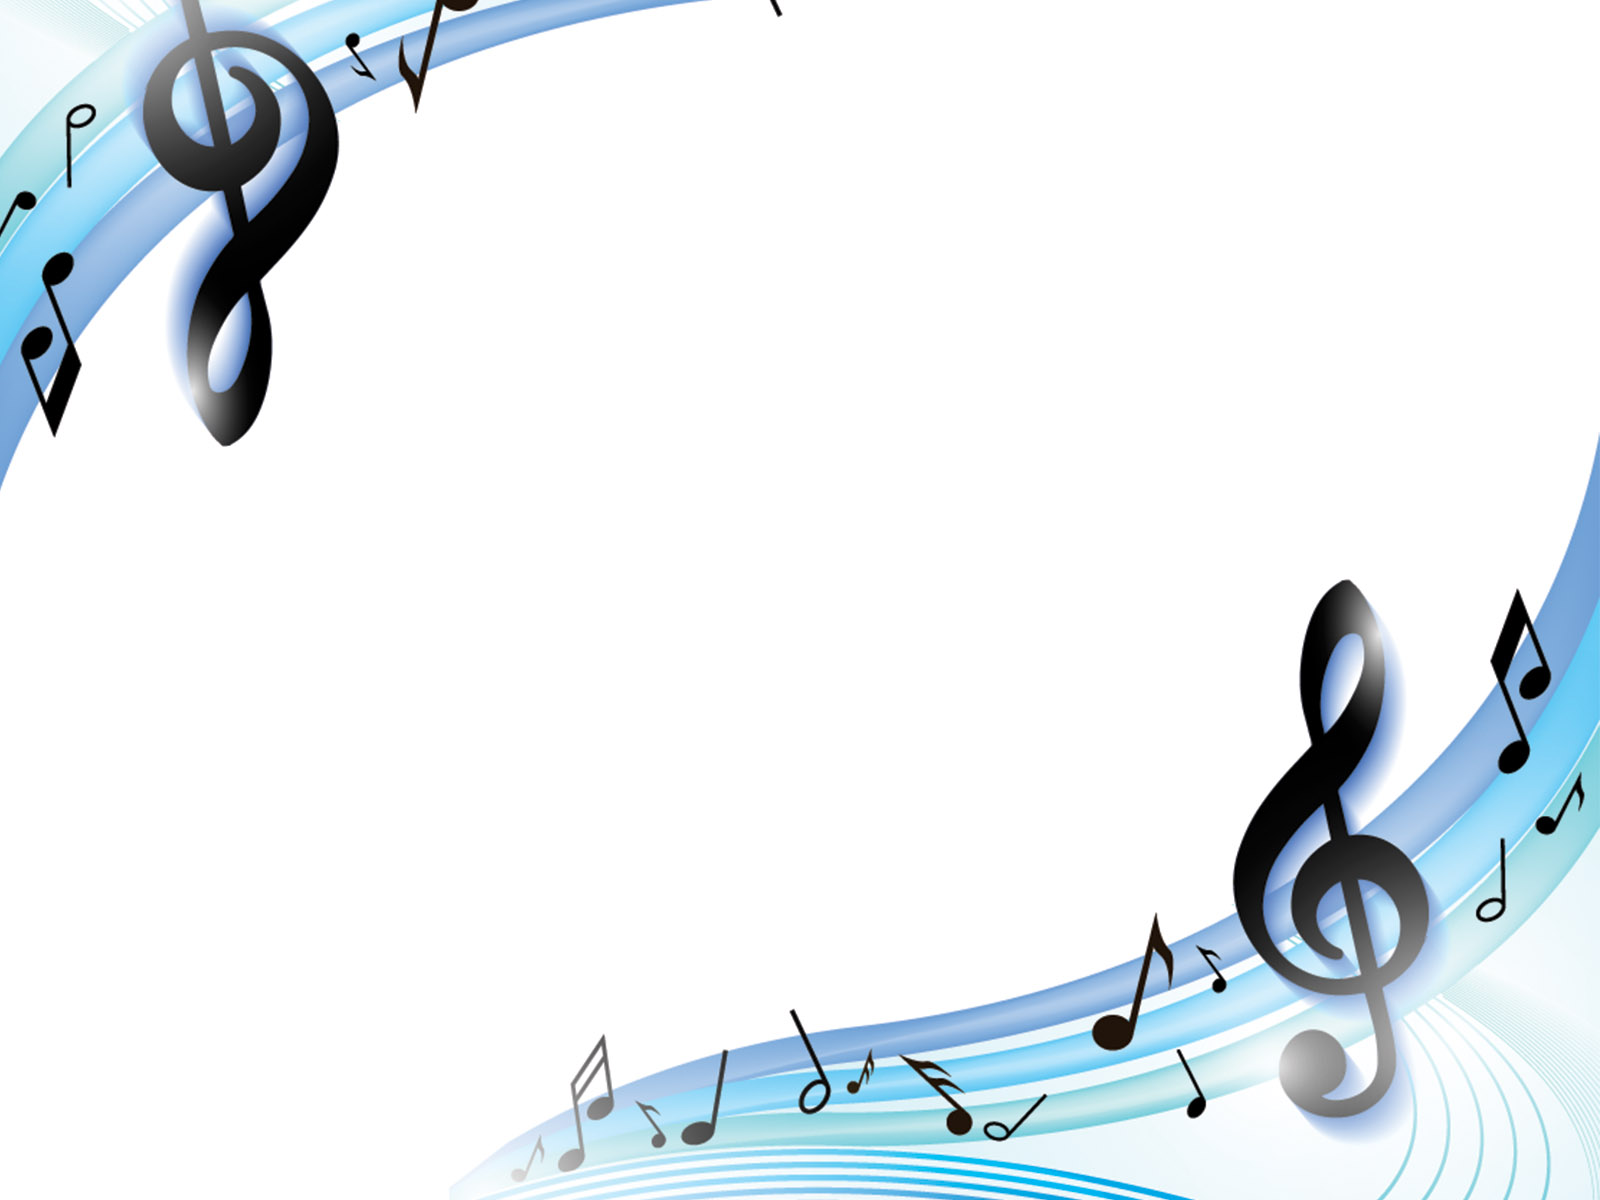 Musical Thoughts Powerpoint Templates - Black, Blue, Music - Free PPT  Backgrounds and Templates